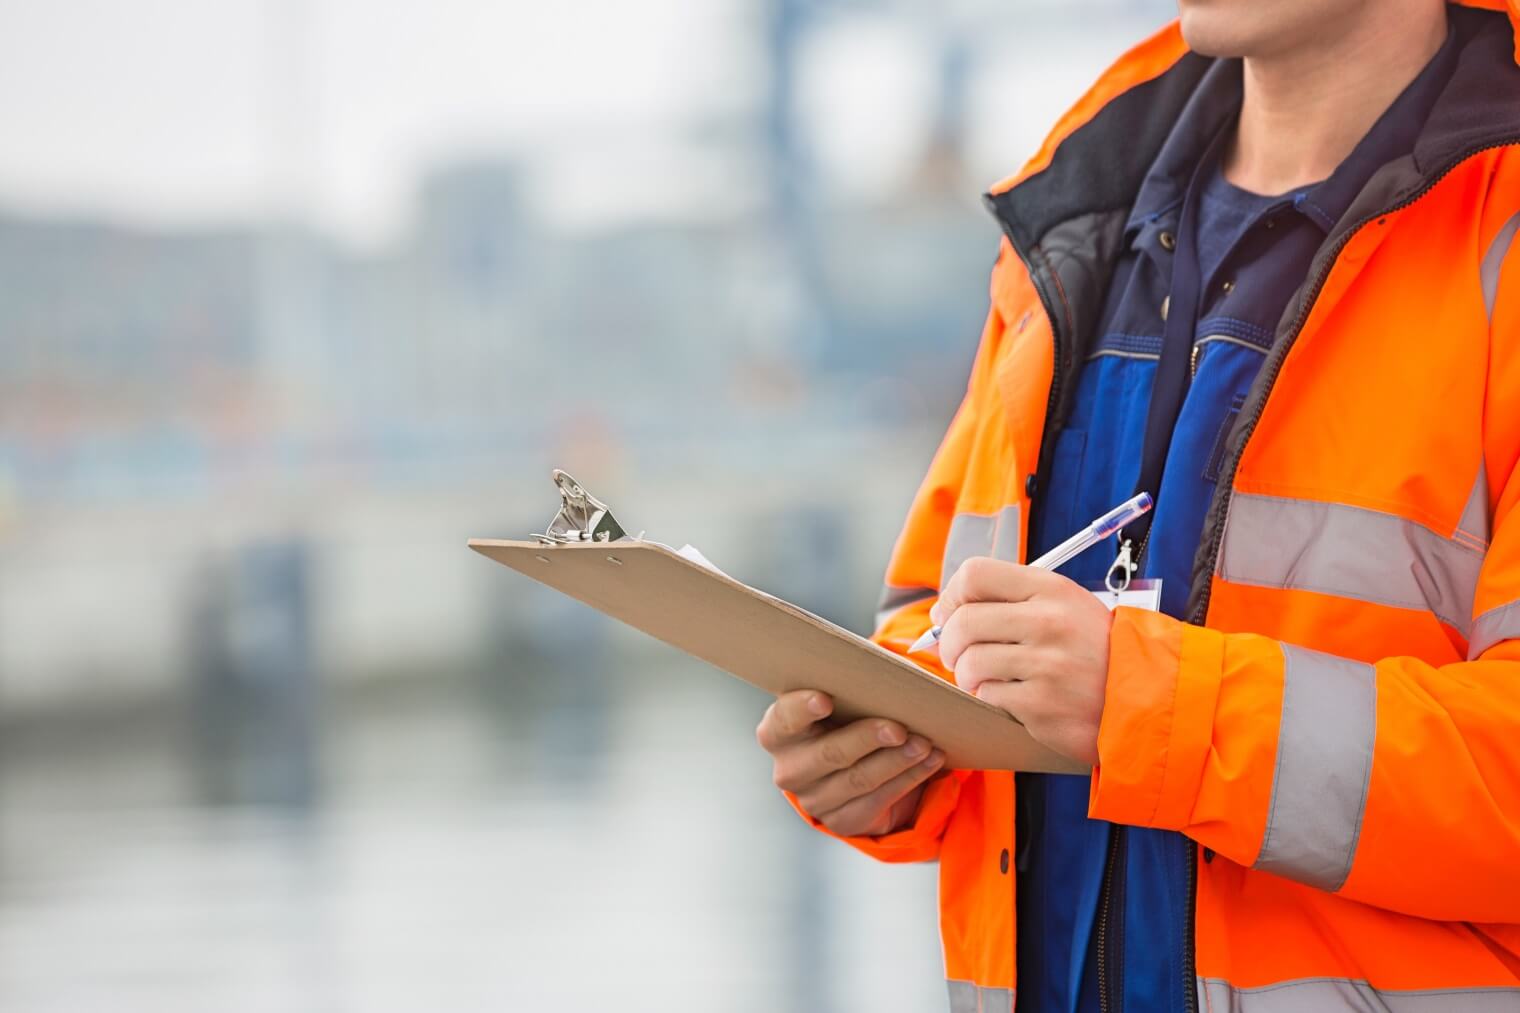 Stock image of man holding a clipboard wearing a high viz jacket